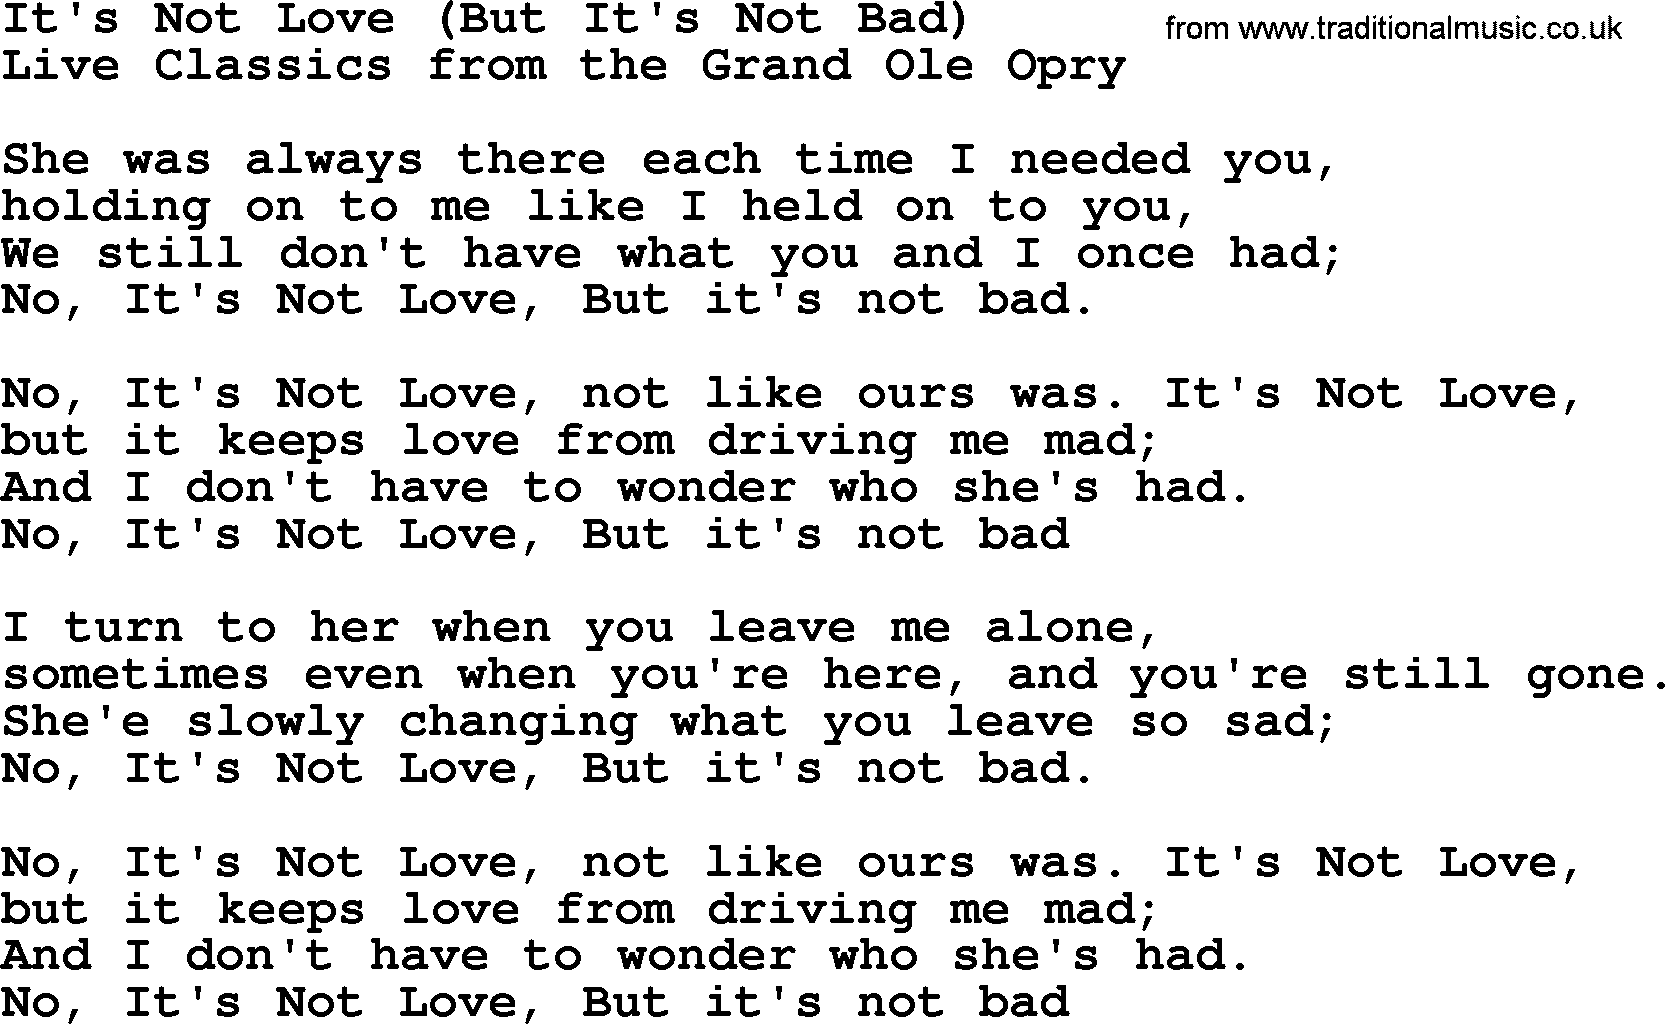 Marty Robbins song: It's Not Love But It's Not Bad, lyrics